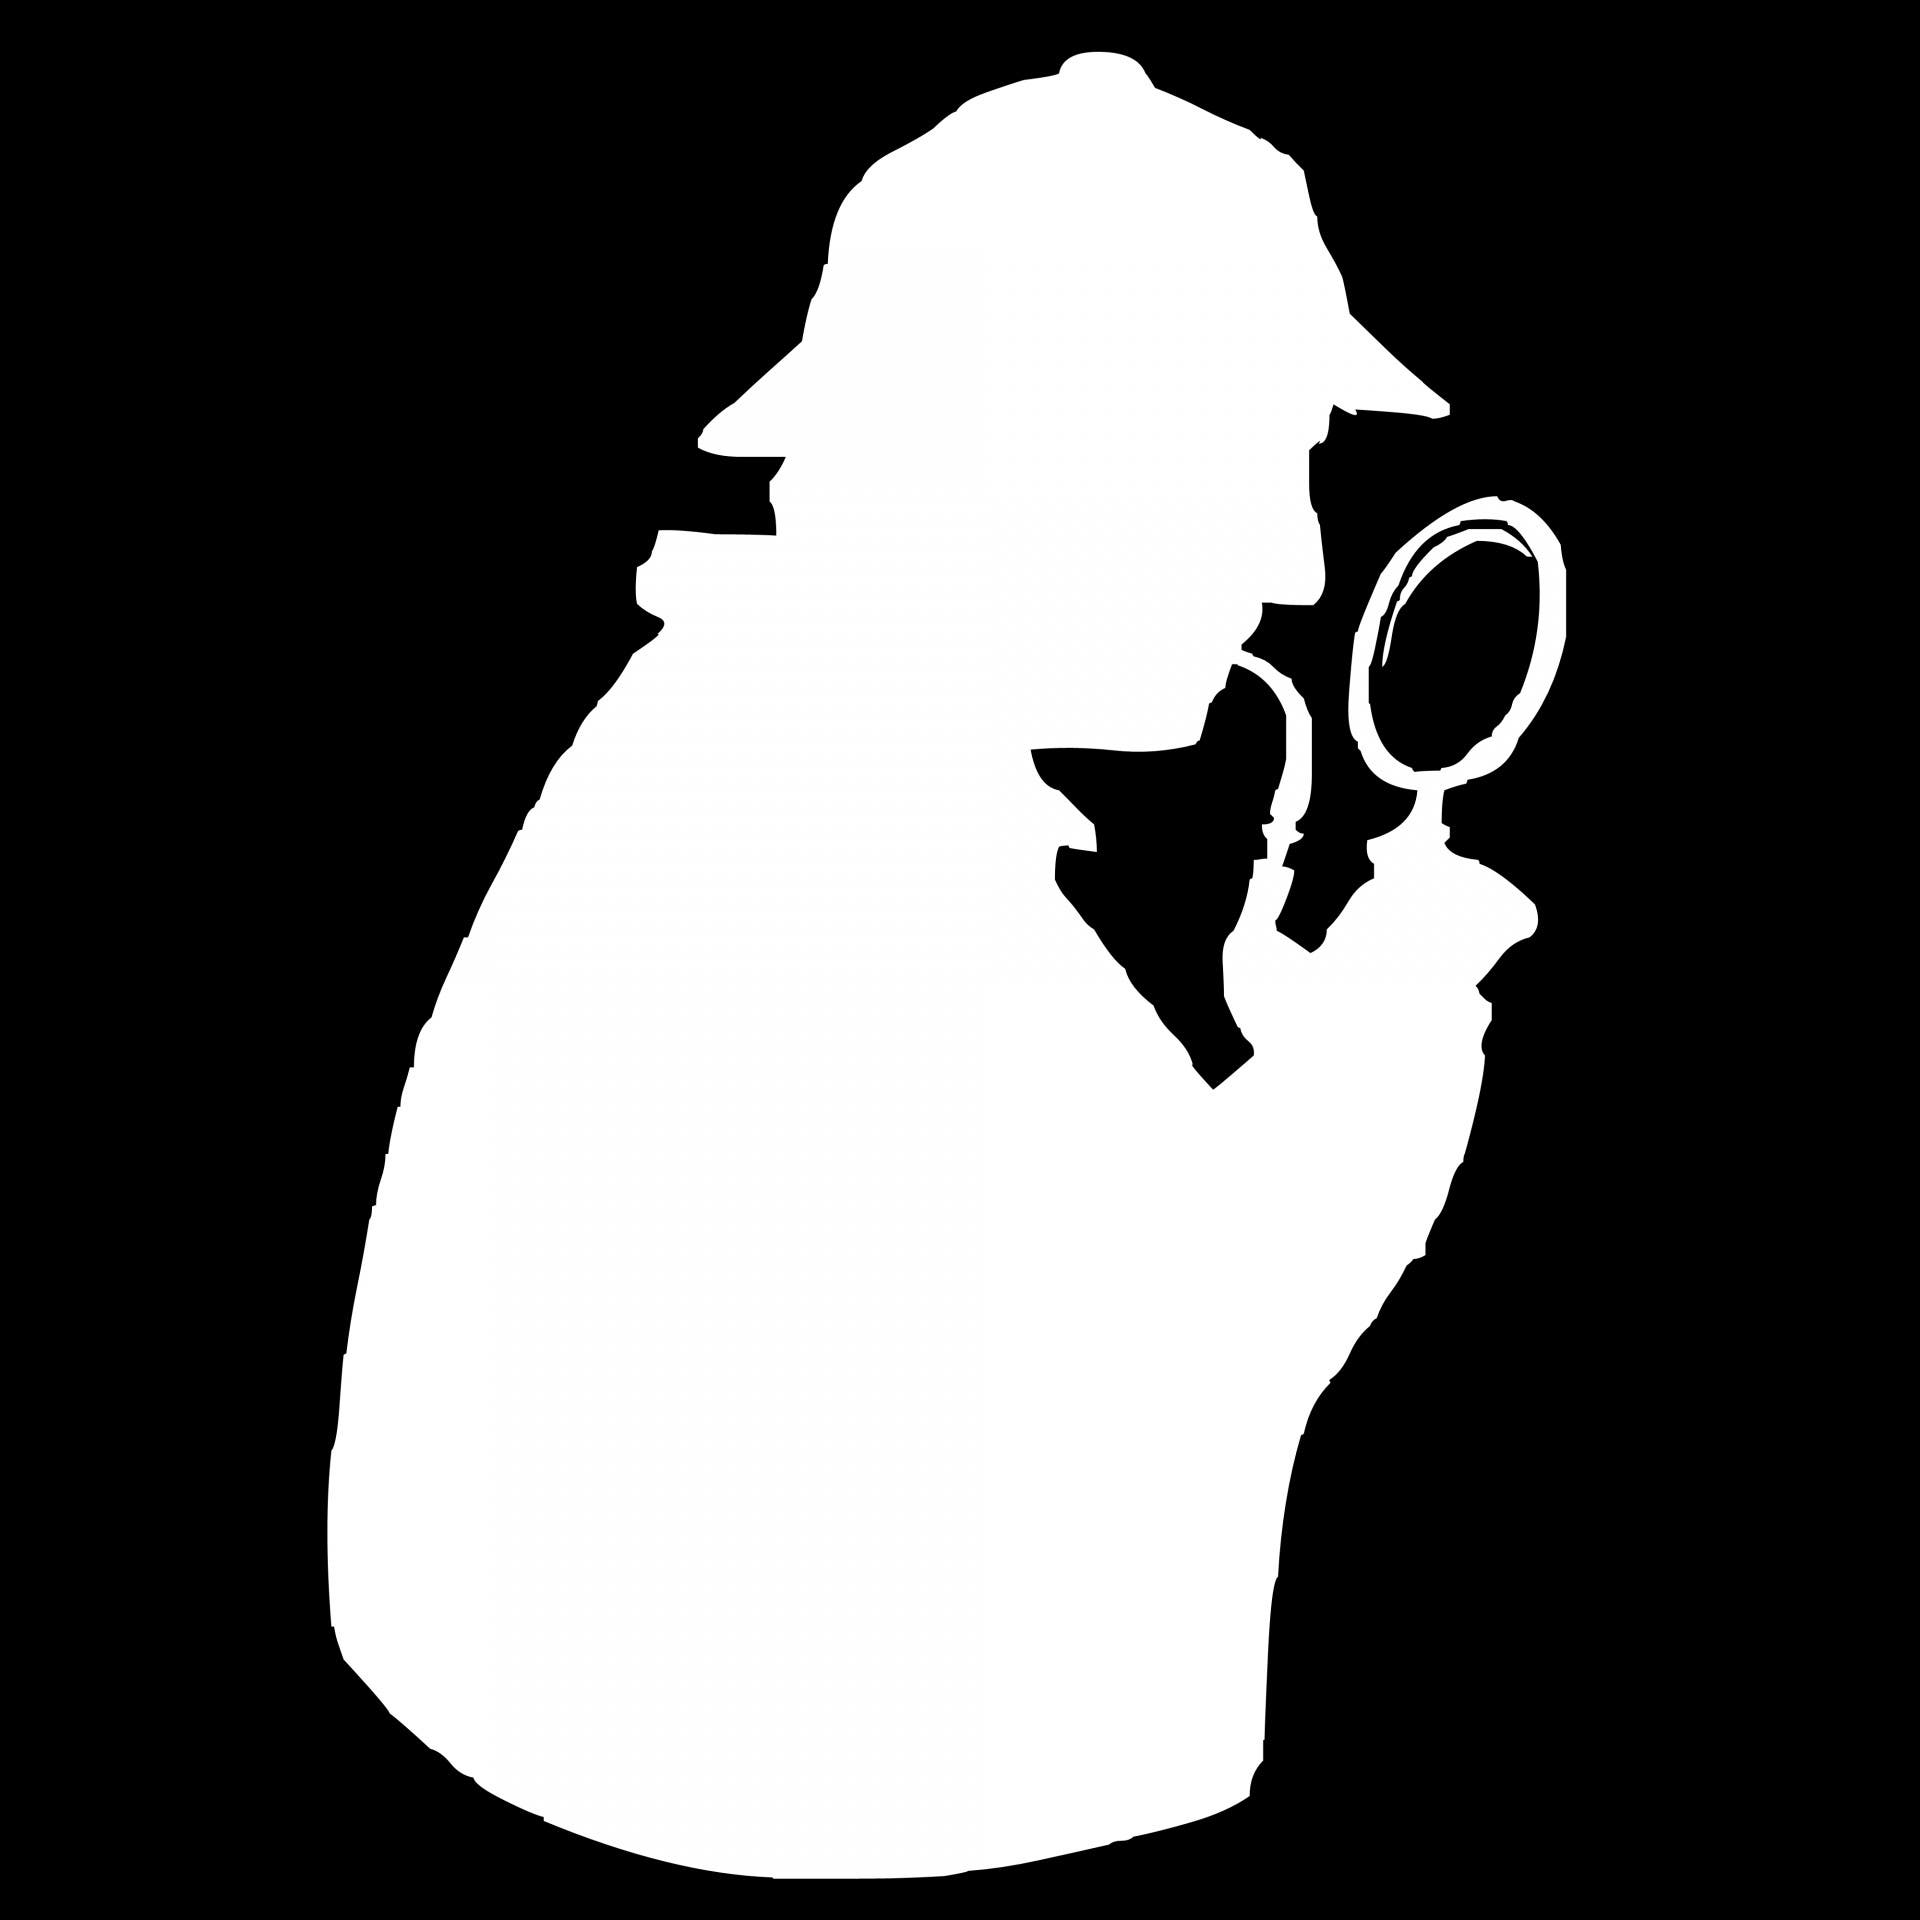 There's a new SHERLOCK in town. Image credits: Public Domain Pictures.